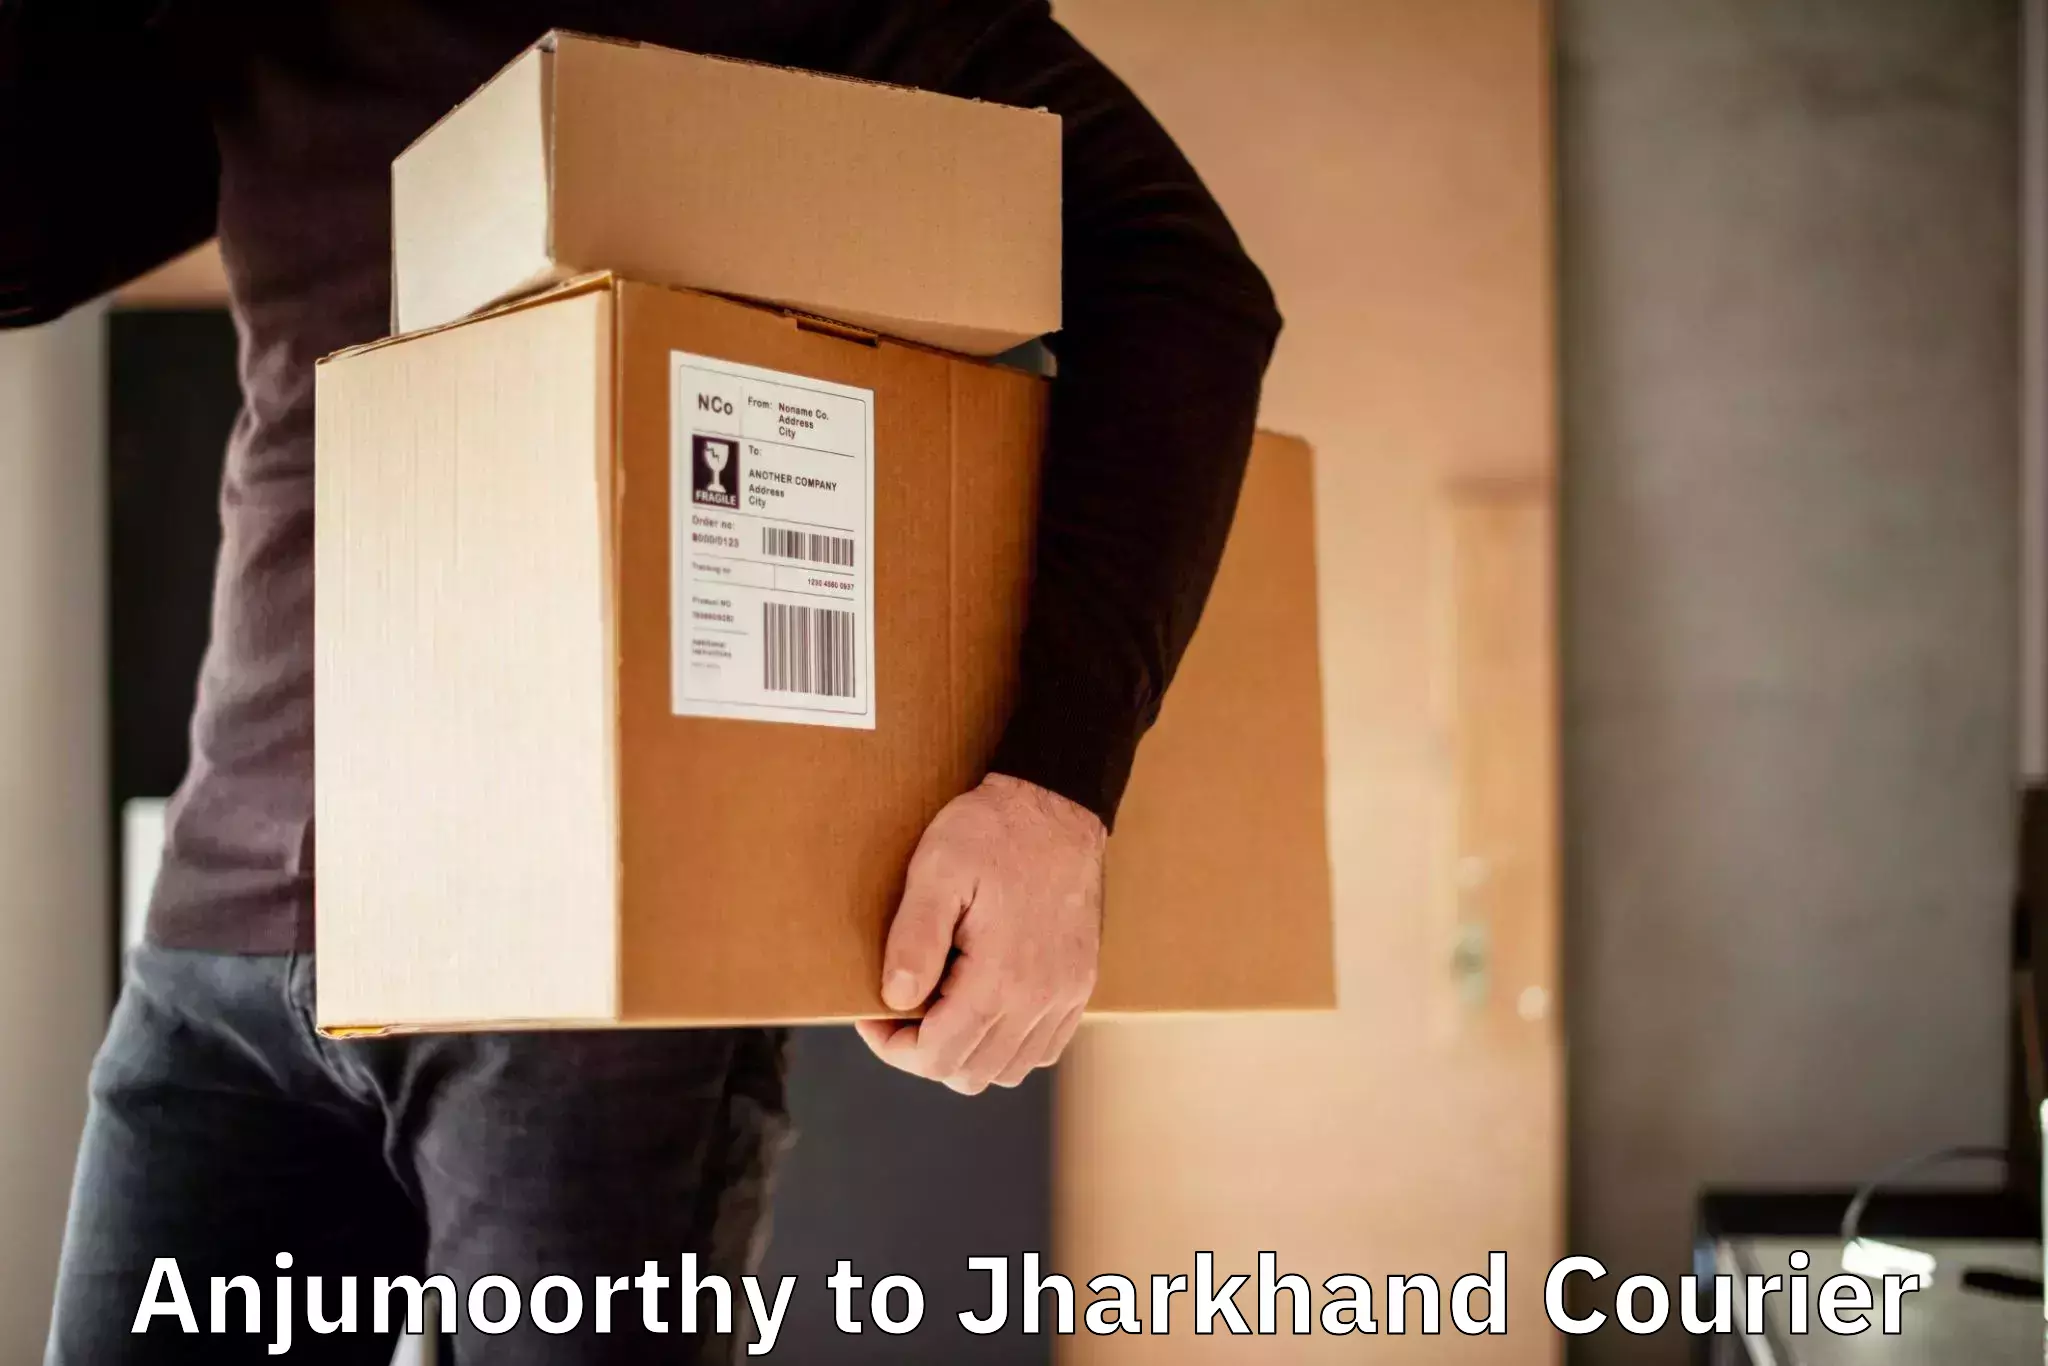 On-time delivery services Anjumoorthy to Ranchi